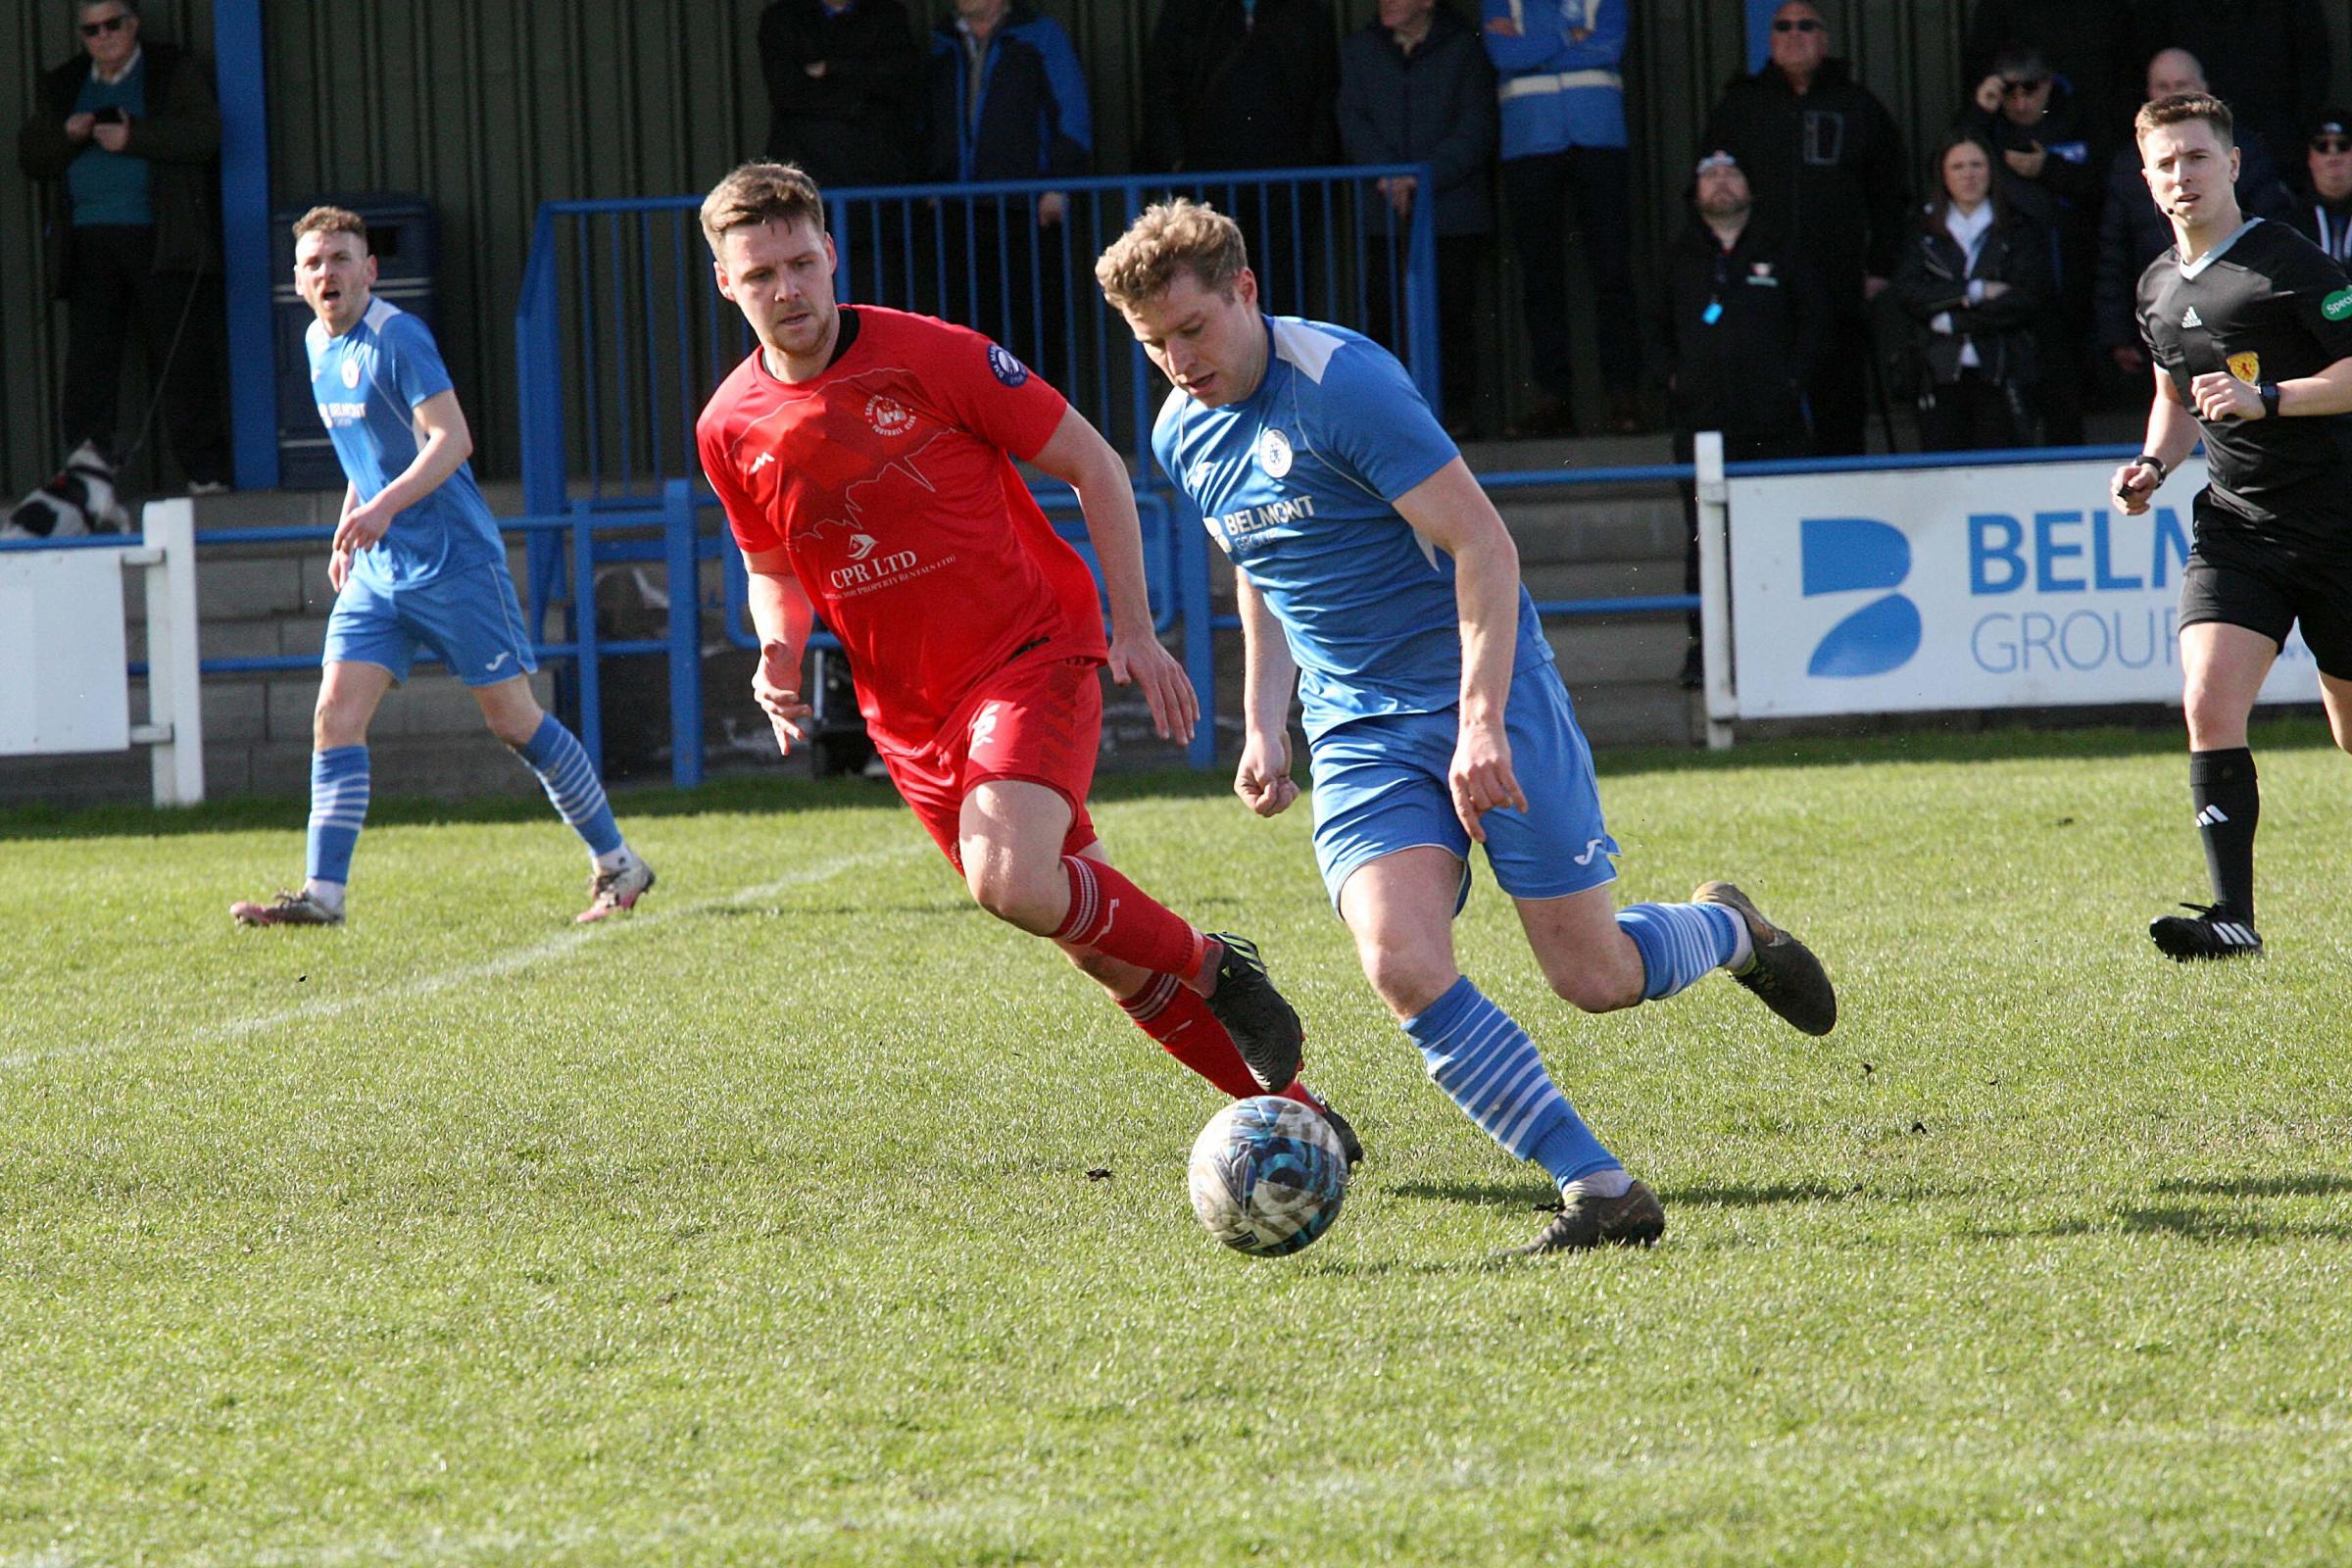 Musselburgh Athletic (blue) must win to keep their faint title hopes alive